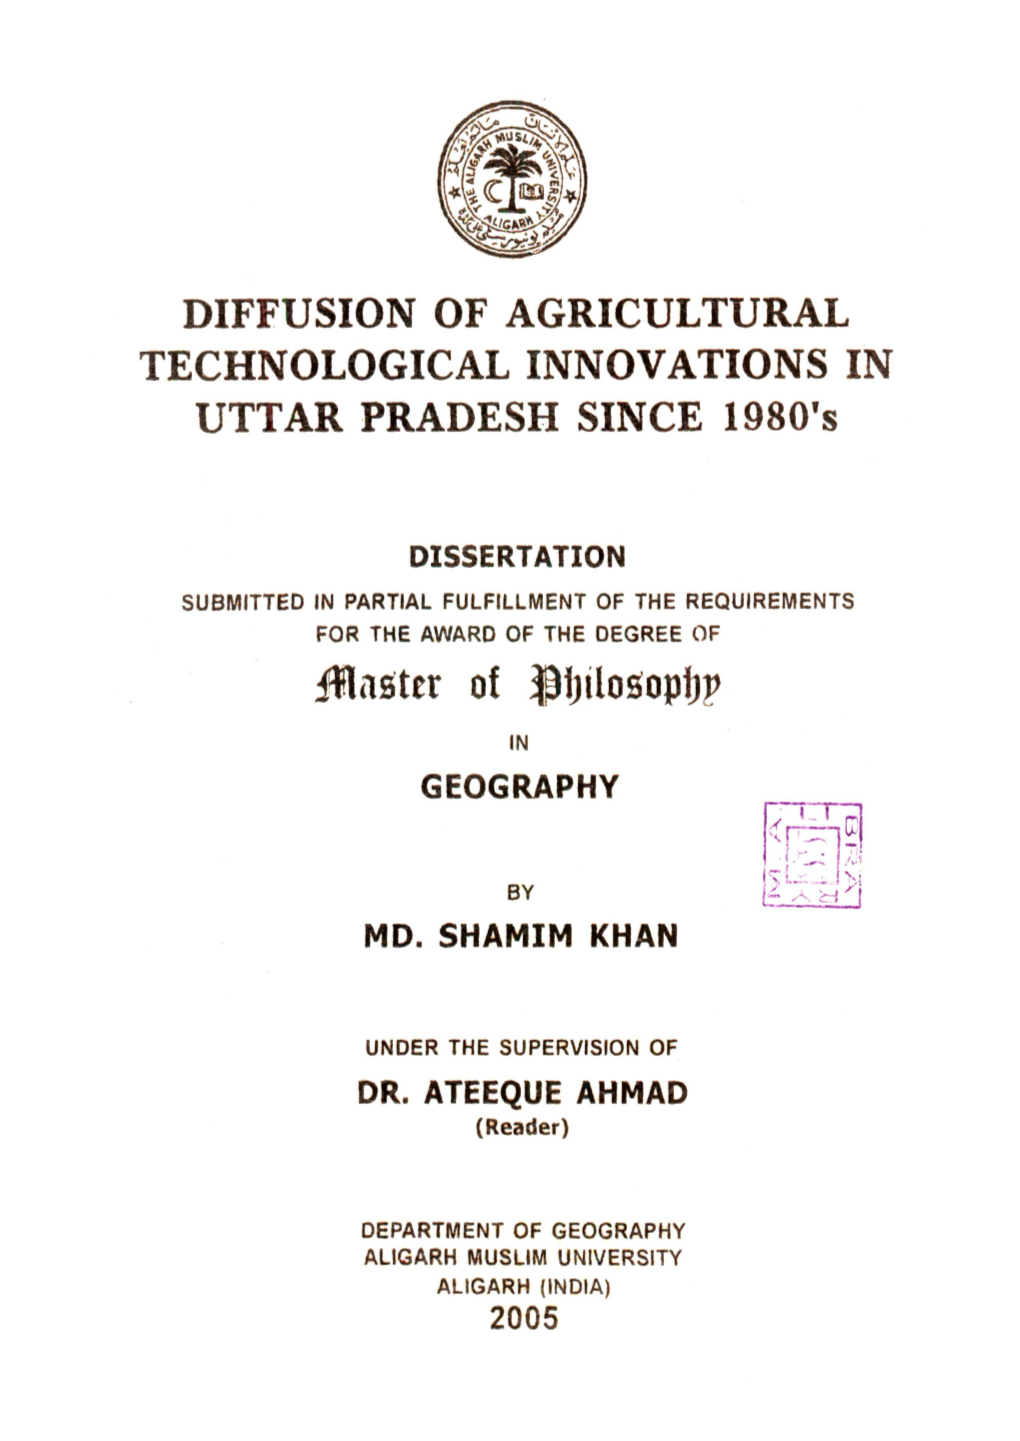 DIFFUSION of AGRICULTURAL TECHNOLOGICAL INNOVATIONS in UTTAR PRADESH SINCE 1980'S